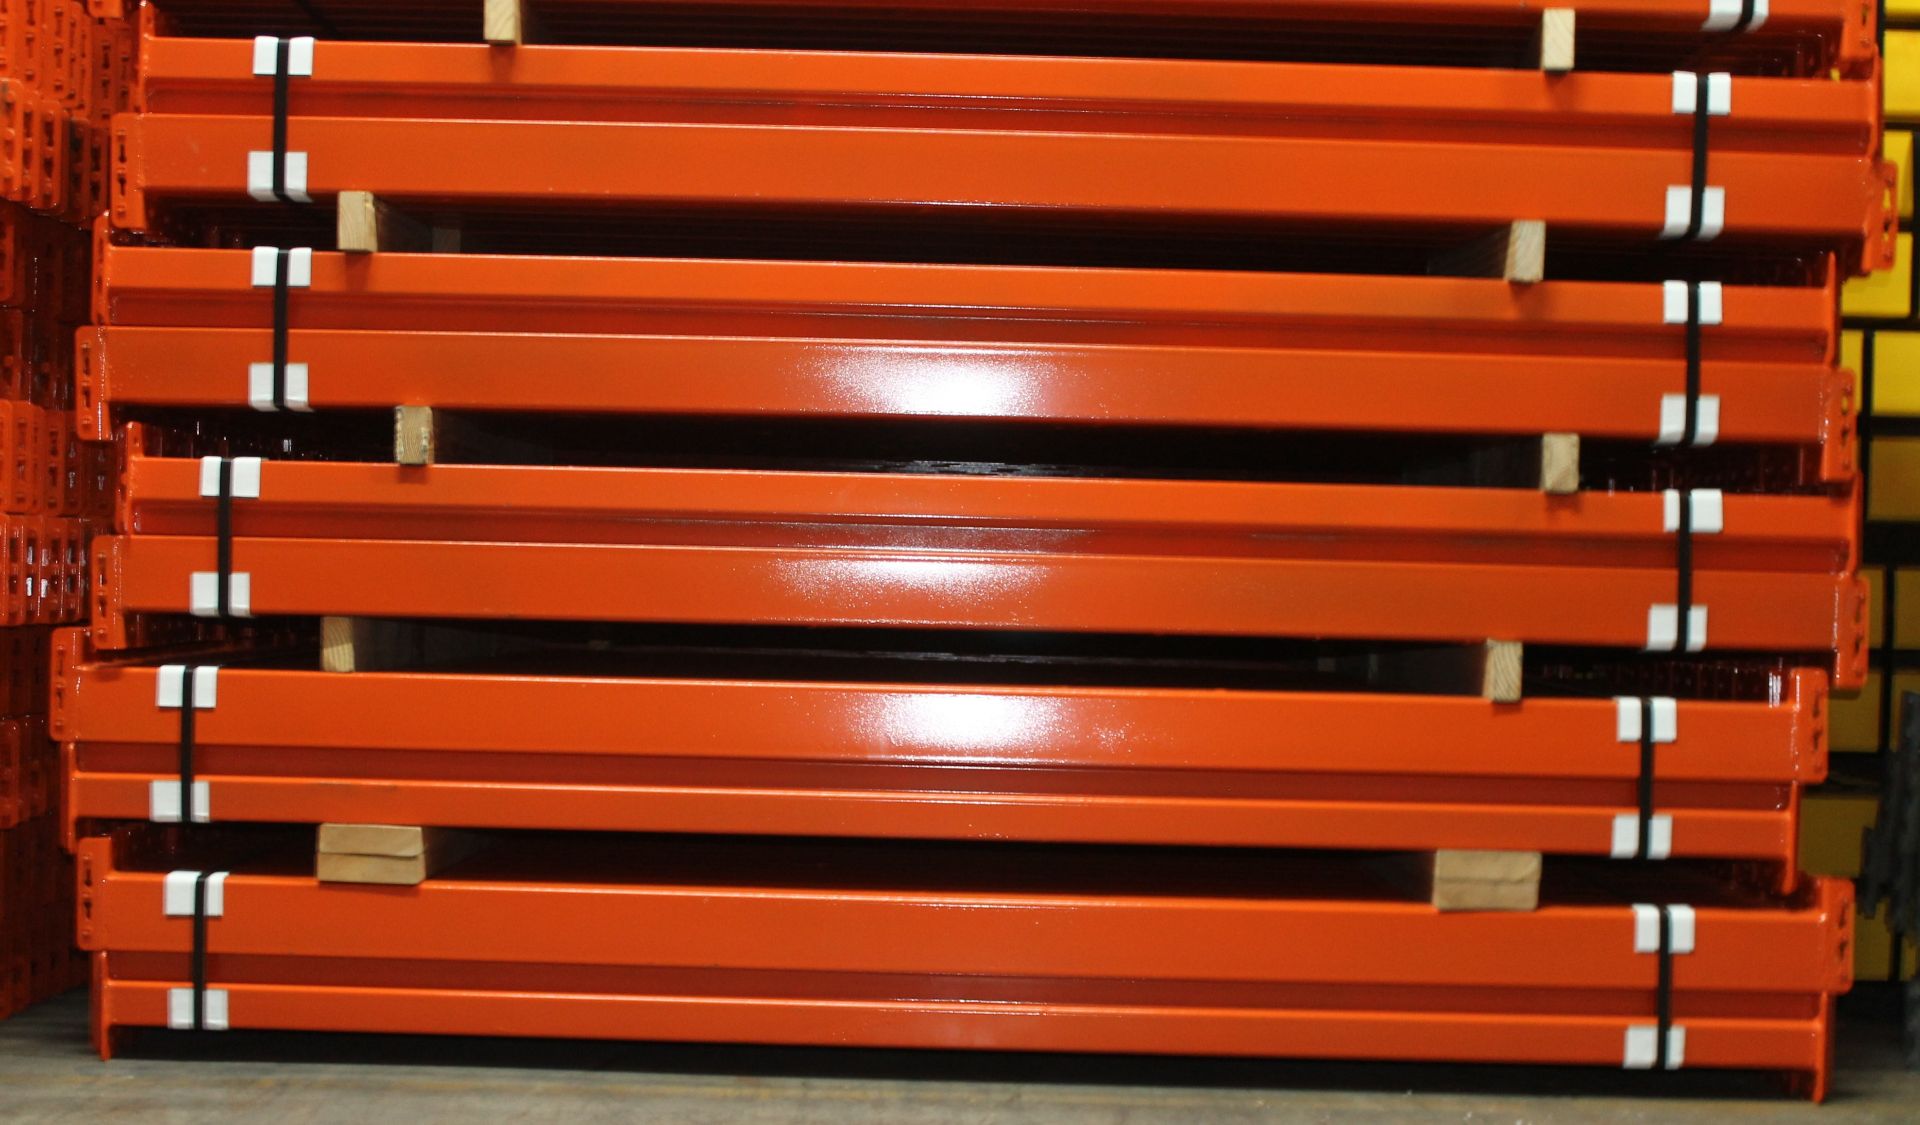 14 BAYS OF TEARDROP STYLE PALLET RACK, LIKE NEW, SIZE: 12'H x 42"D X 8'W - Image 3 of 4